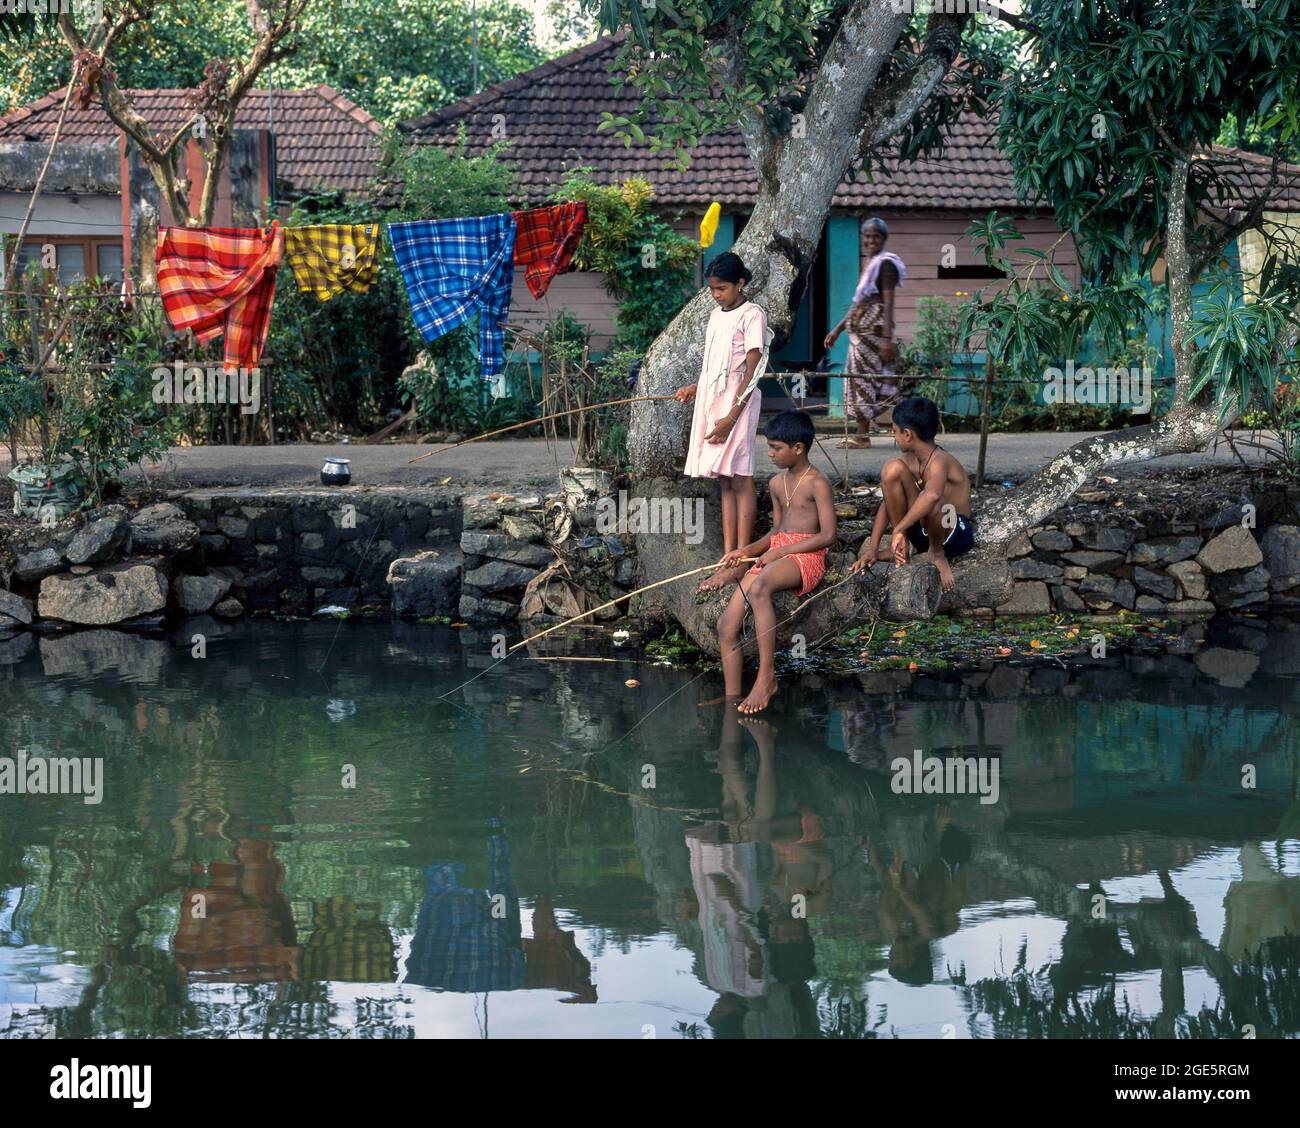 Children fishing in the Backwaters of Kuttanad, Alapuzha; Aleppey, Kerala, India Stock Photo